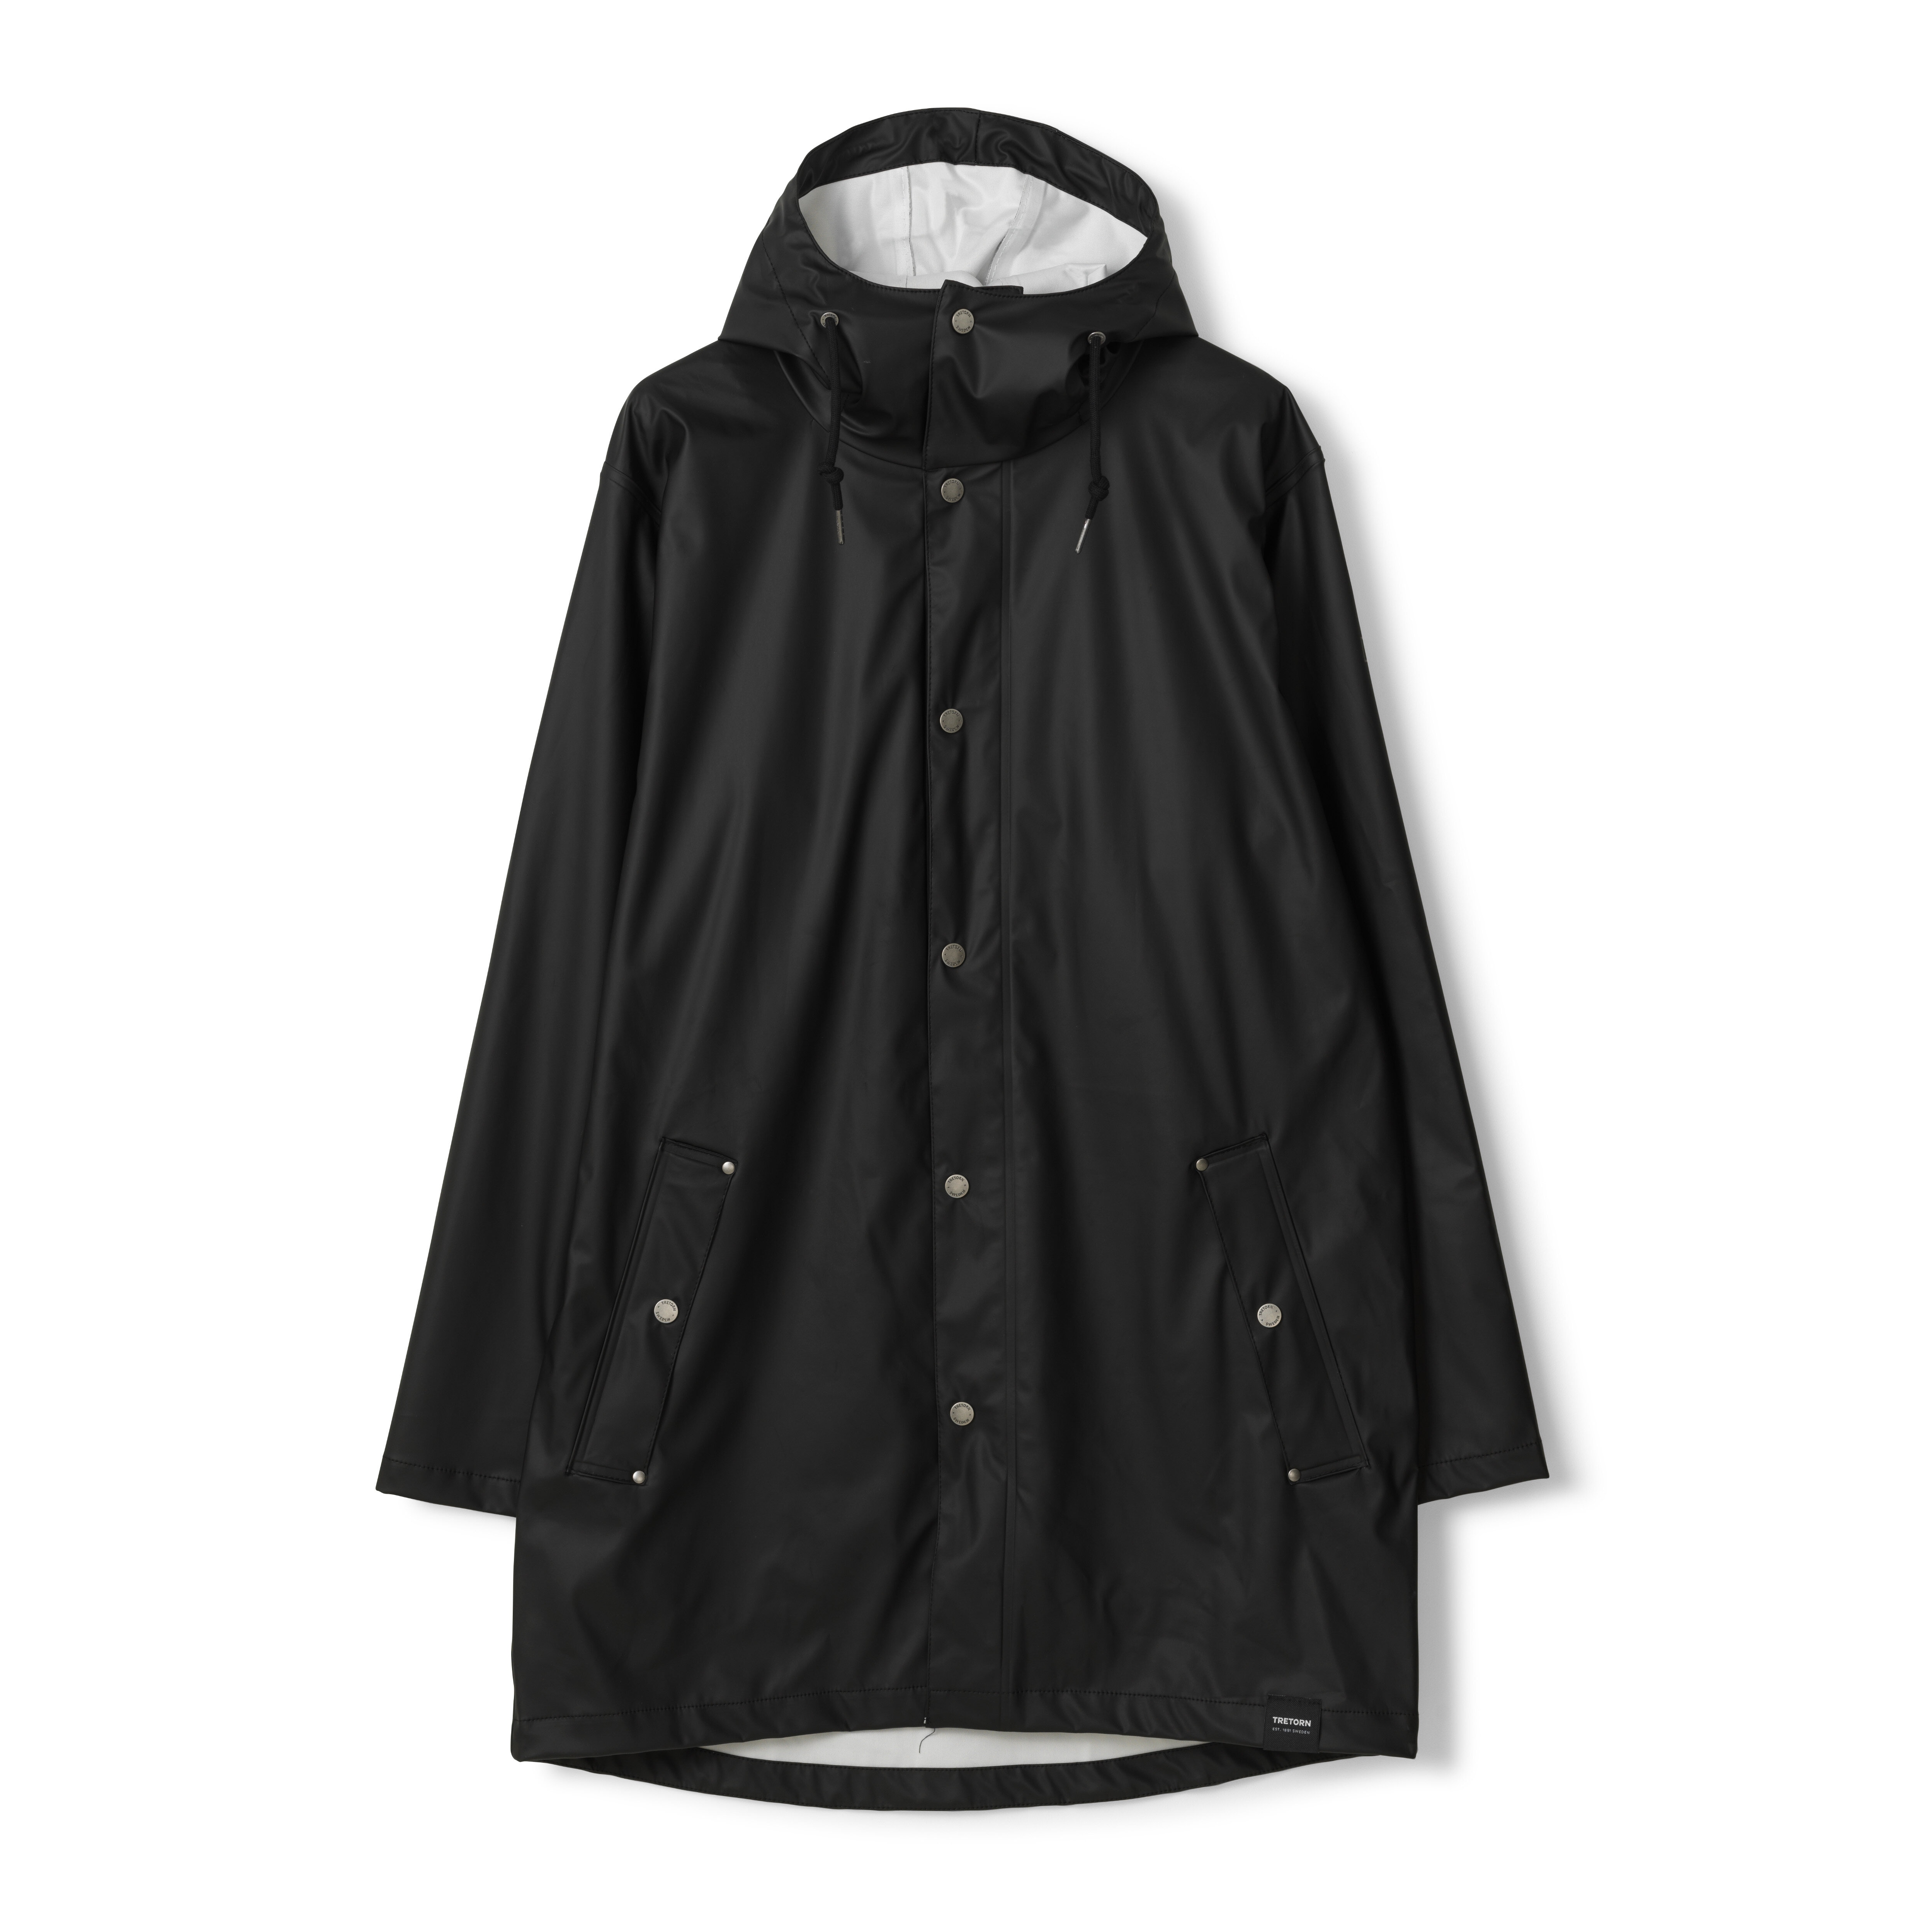 Wings Plus Eco rain jacket by Tretorn for men and women in the colour black